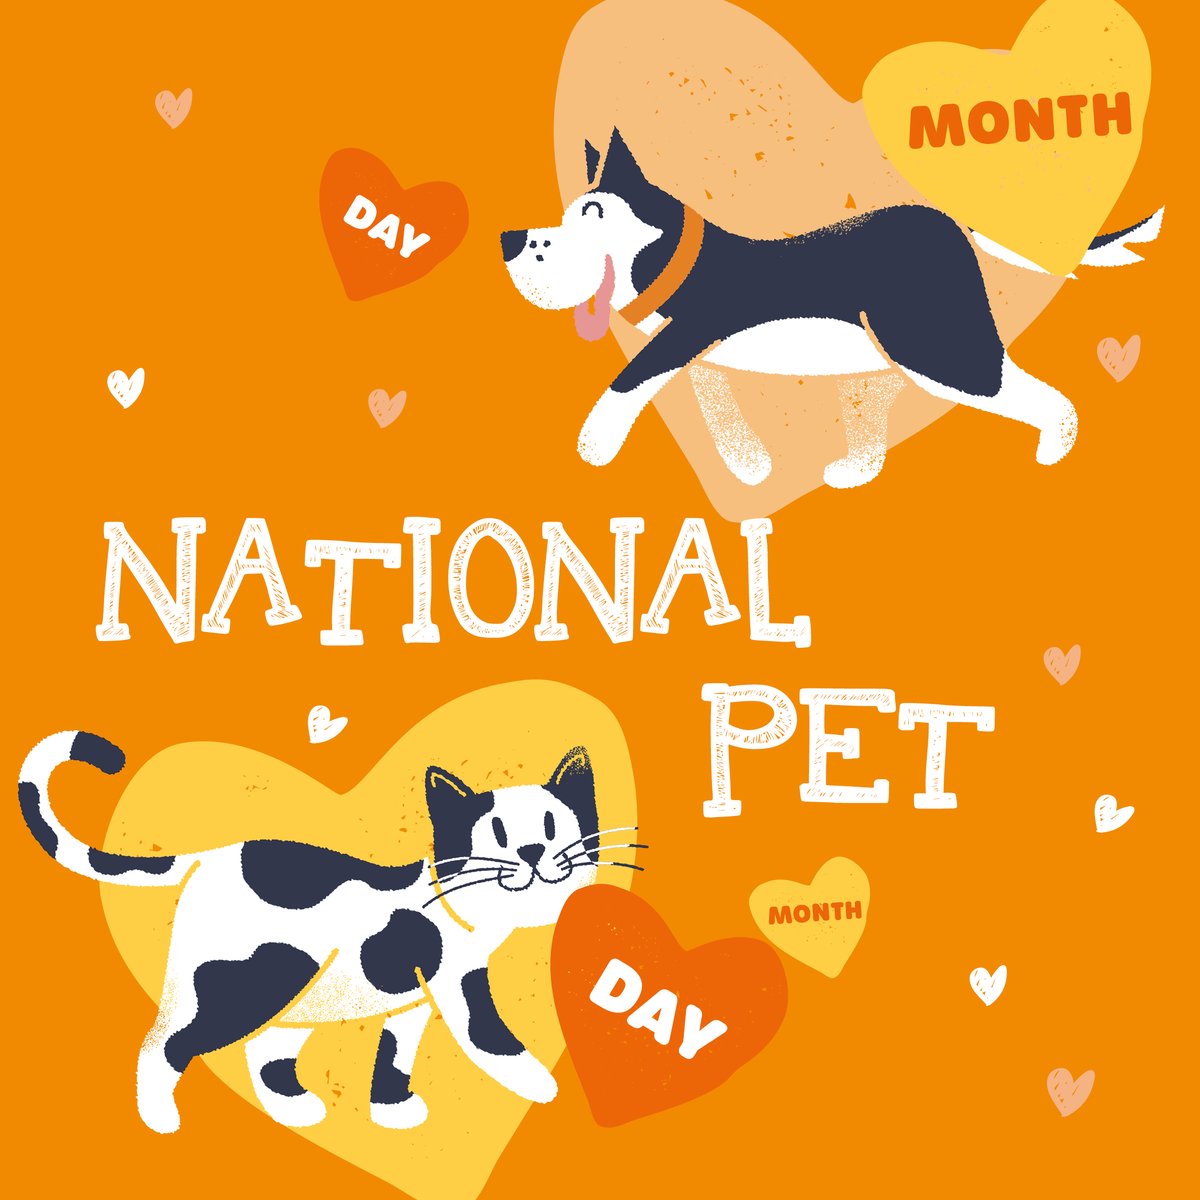 Not only is today #nationalpetday but April is also #nationalpetmonth so that means double the celebration for our pets 🐶 🐱